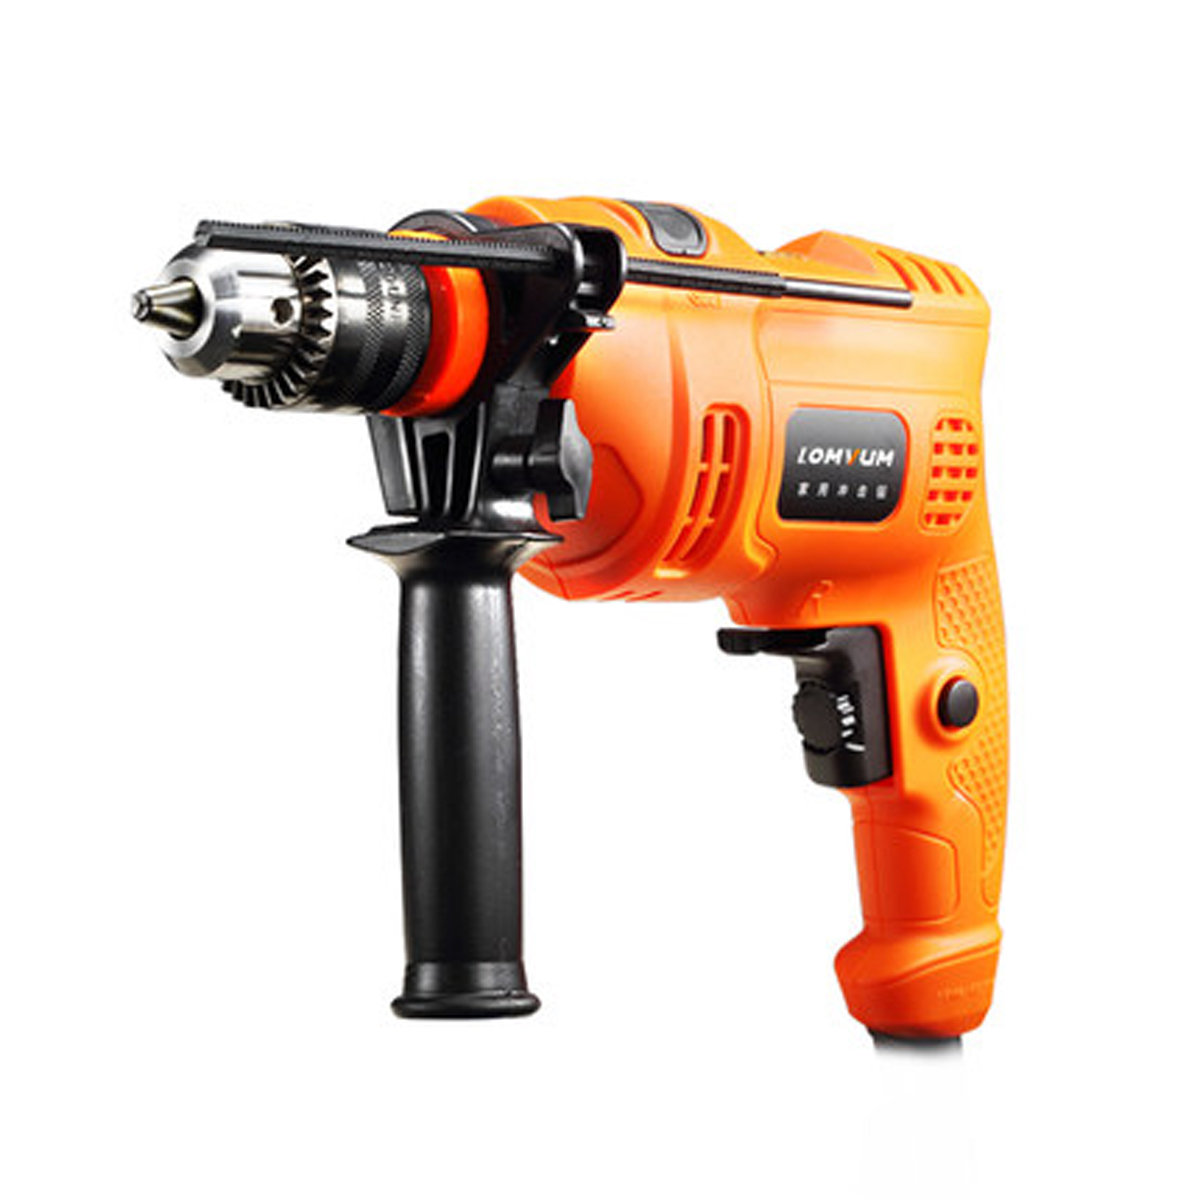 Lomvum Multi-function 600W 220V Impact Drill Electric Screwdriver Angle Grinder Power Tools Kit